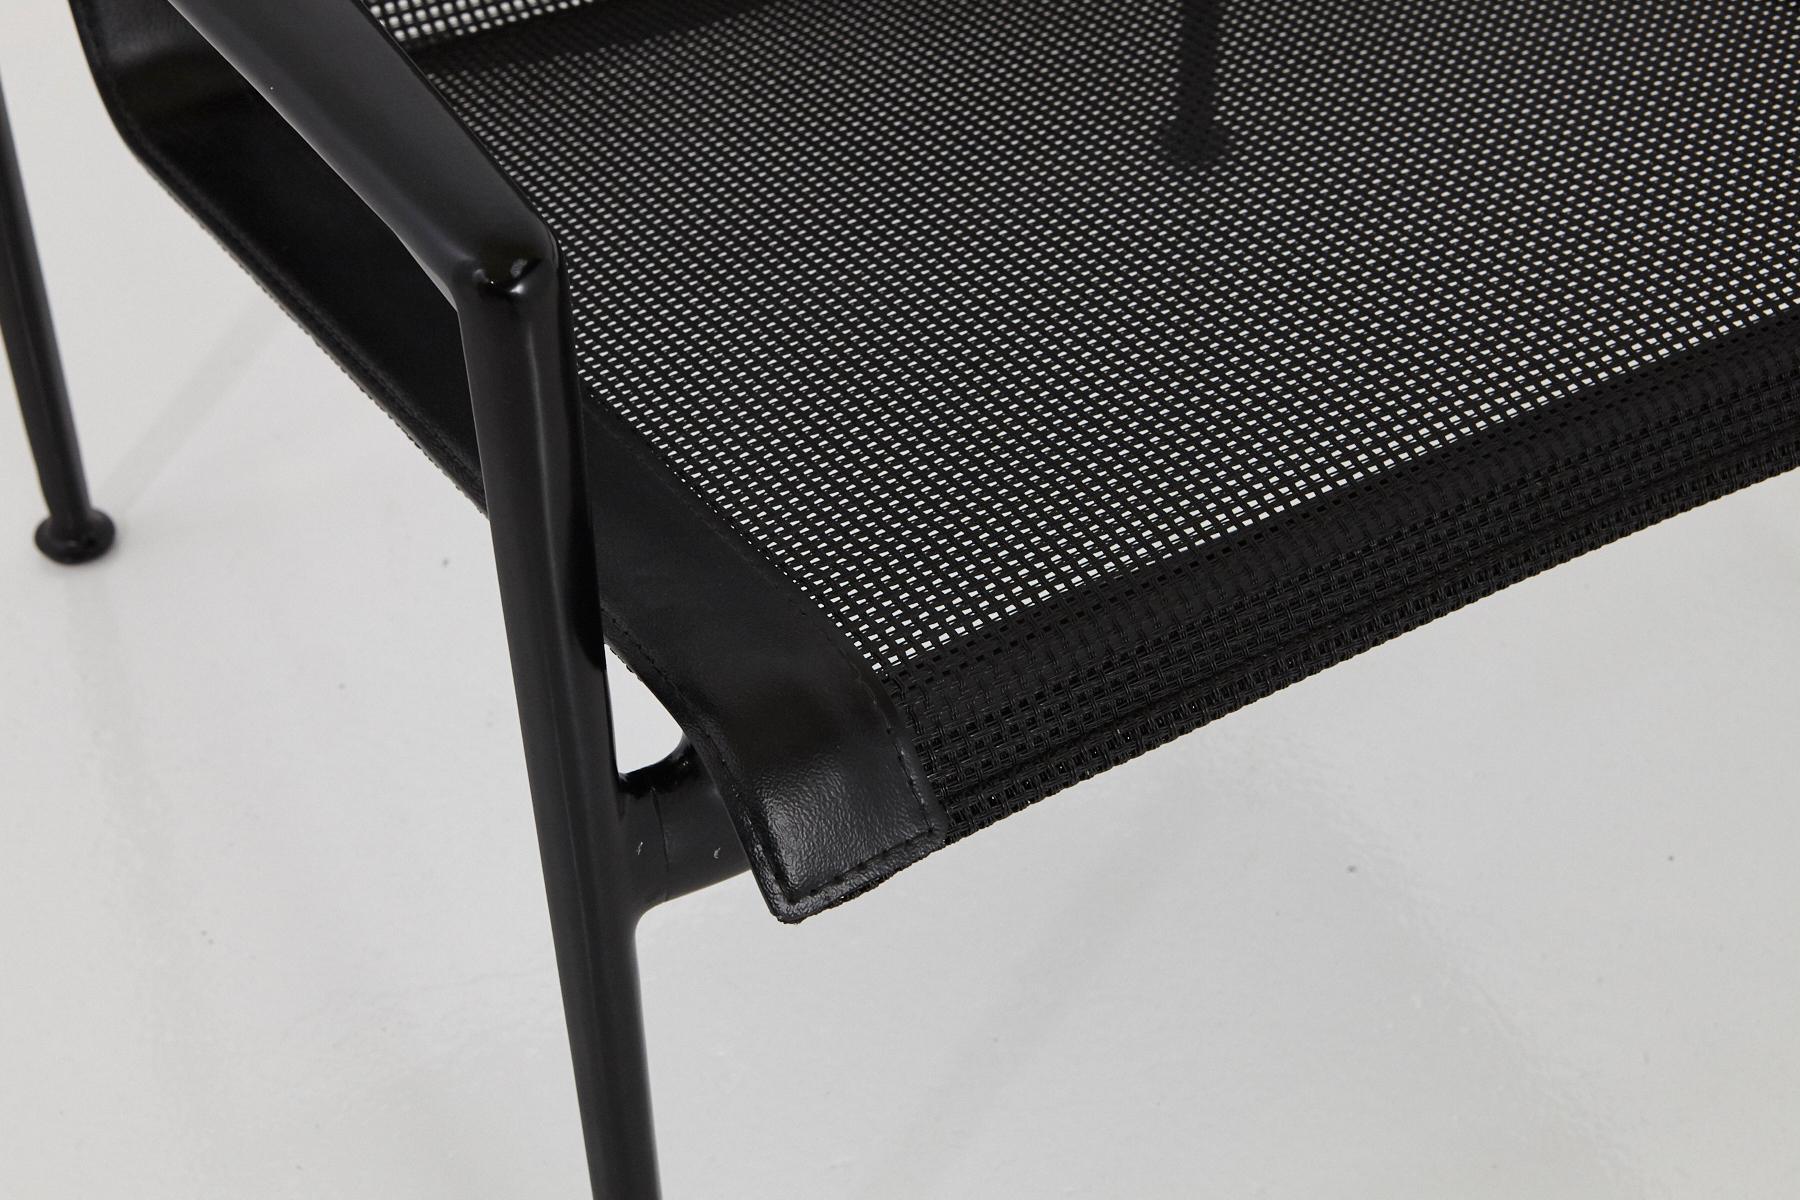 Aluminum Richard Schultz All Black Garden Lounge Chair from the '1966 Collection' For Sale